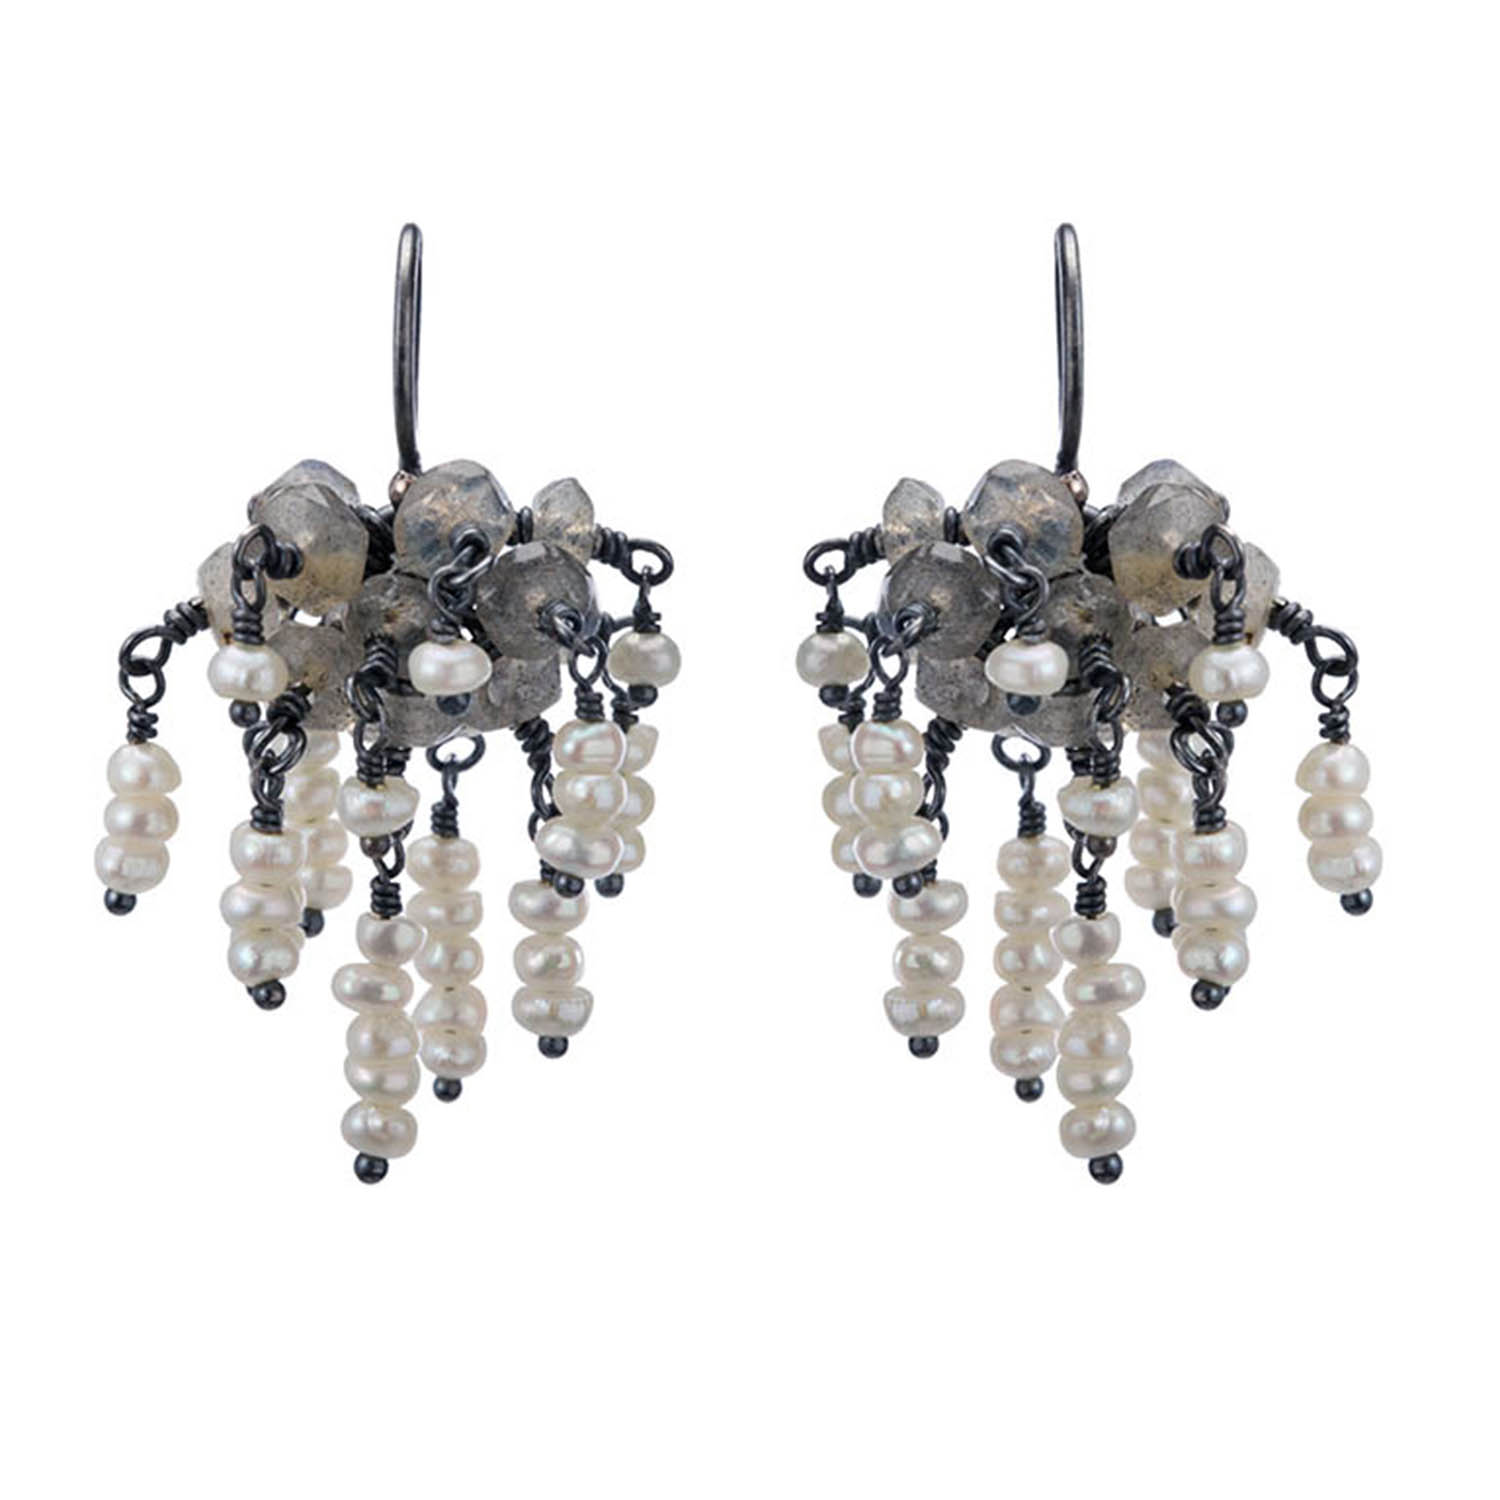 Michelle Pajak-Reynolds Undina Collection Galena chandelier earrings